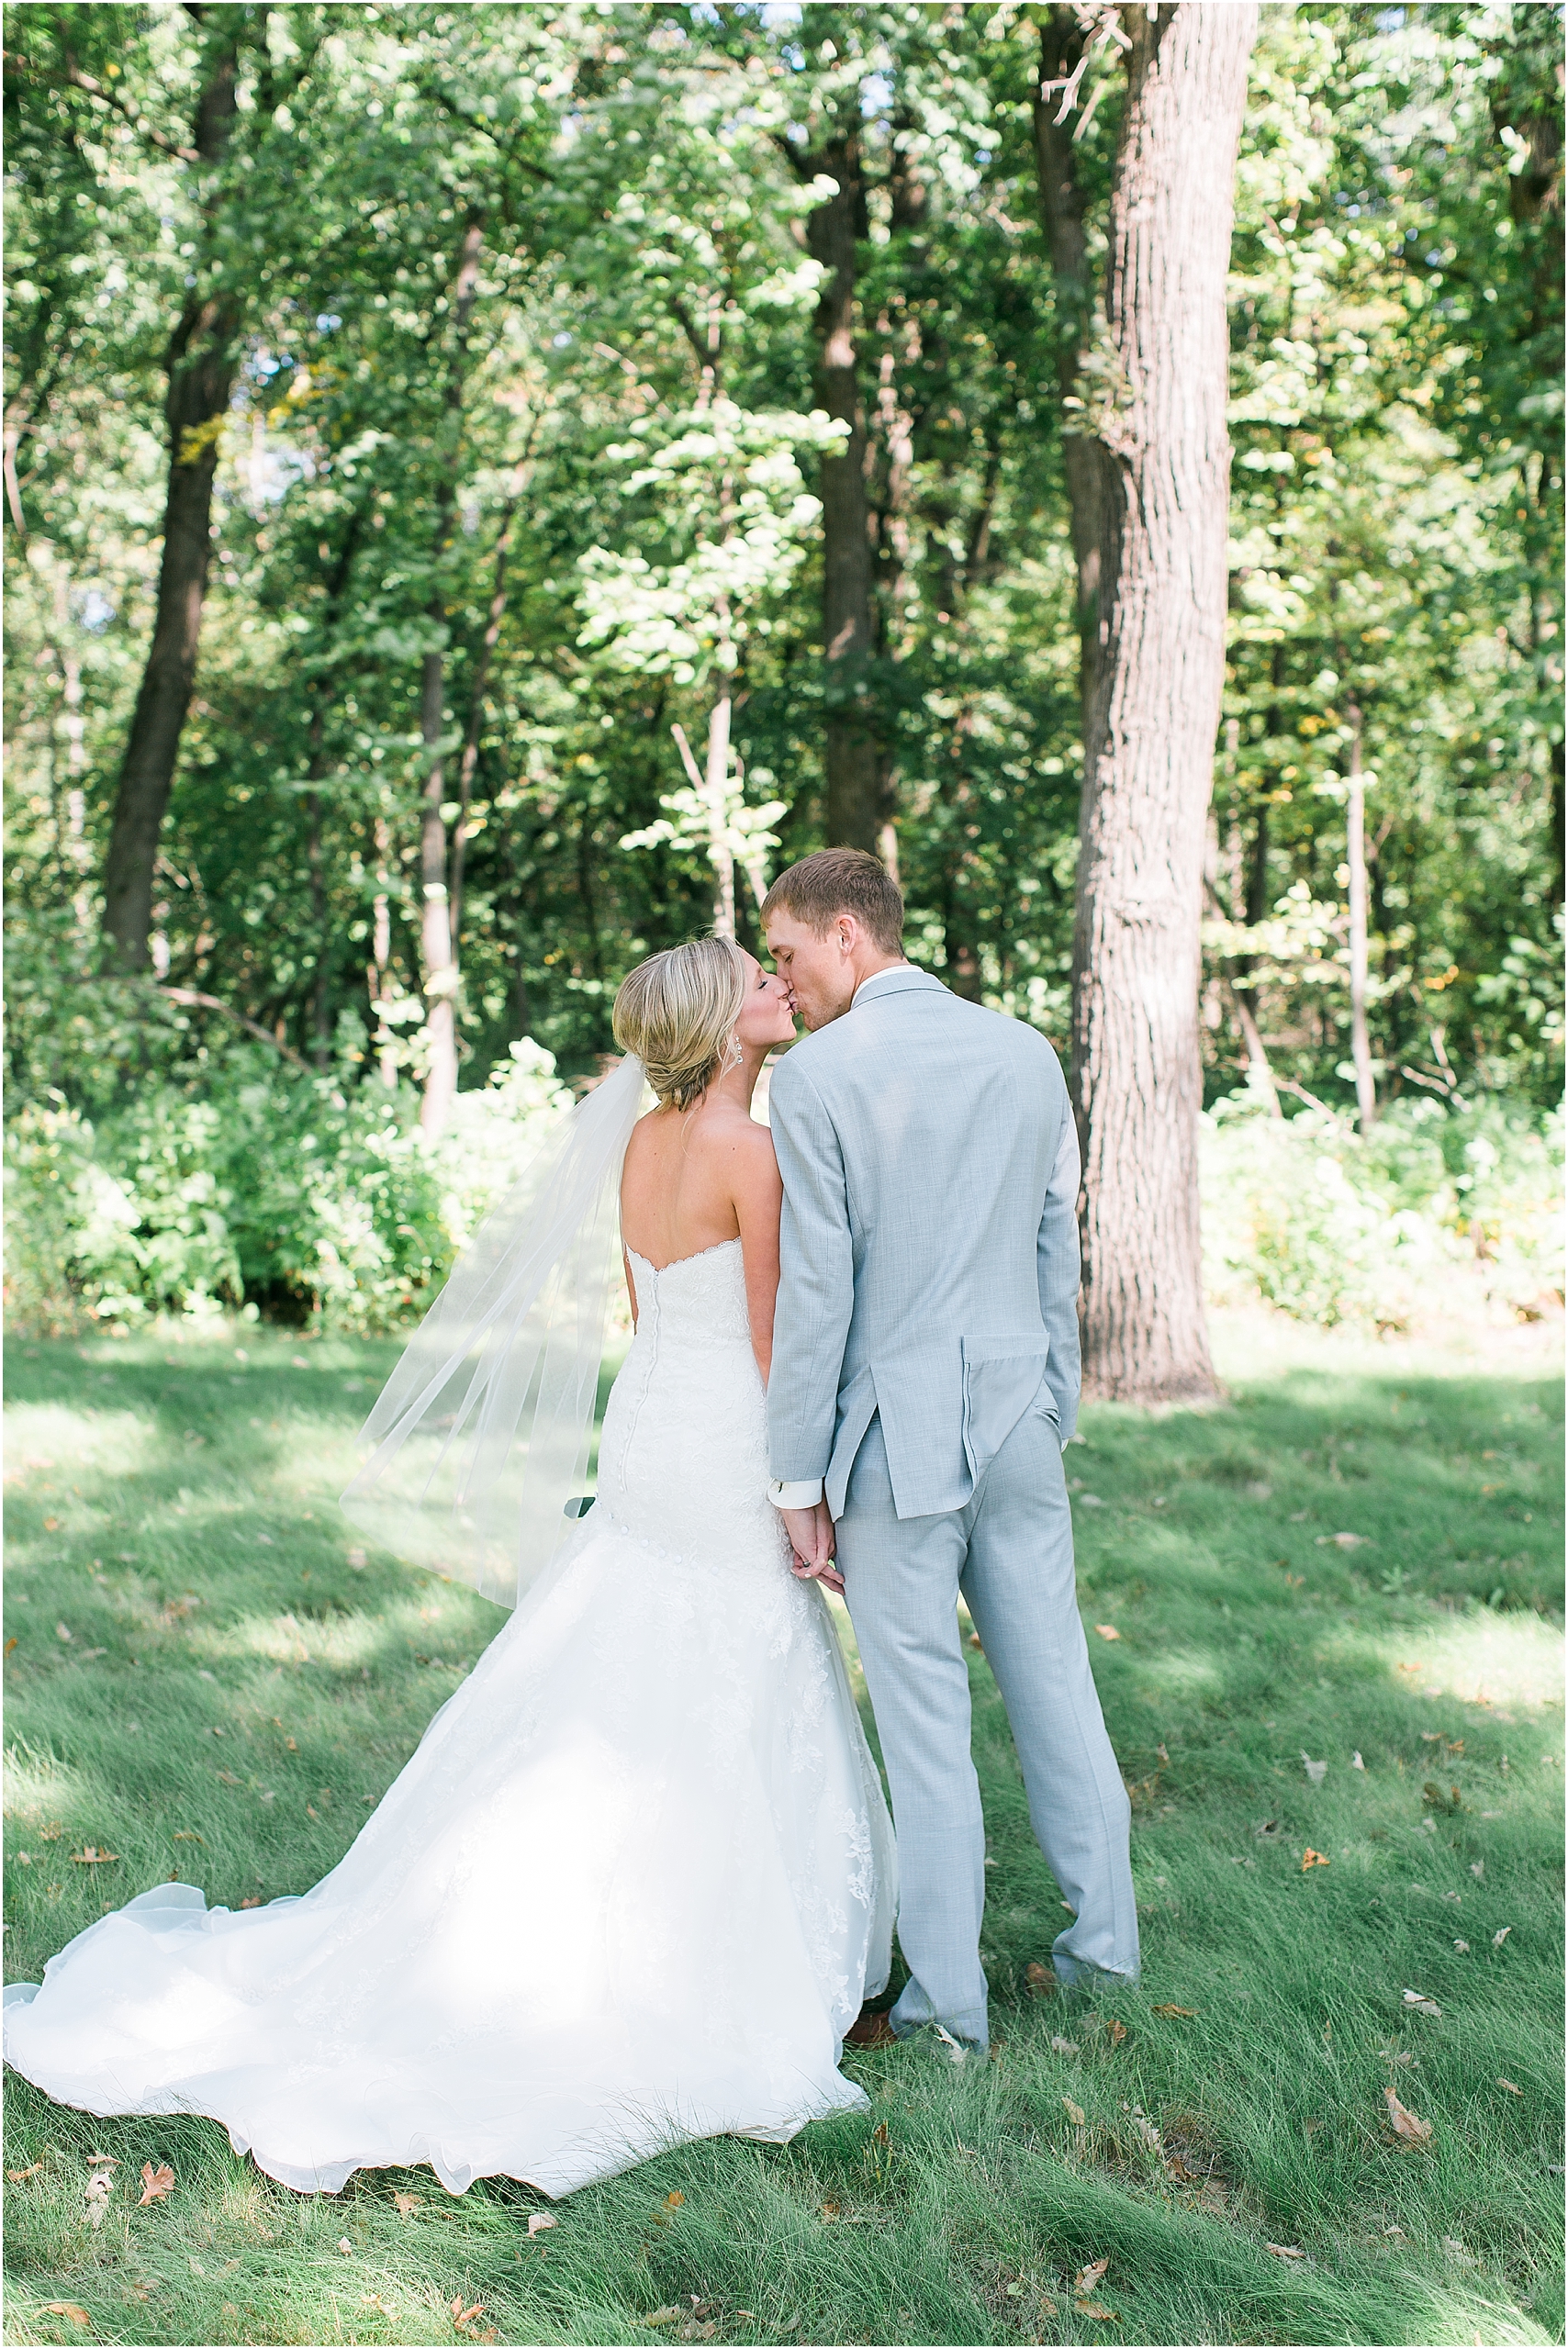 Bride and groom portrait kissing outside at Minnesota summer wedding in Buffalo MN photographed by Mallory Kiesow, Minnesota wedding photographer